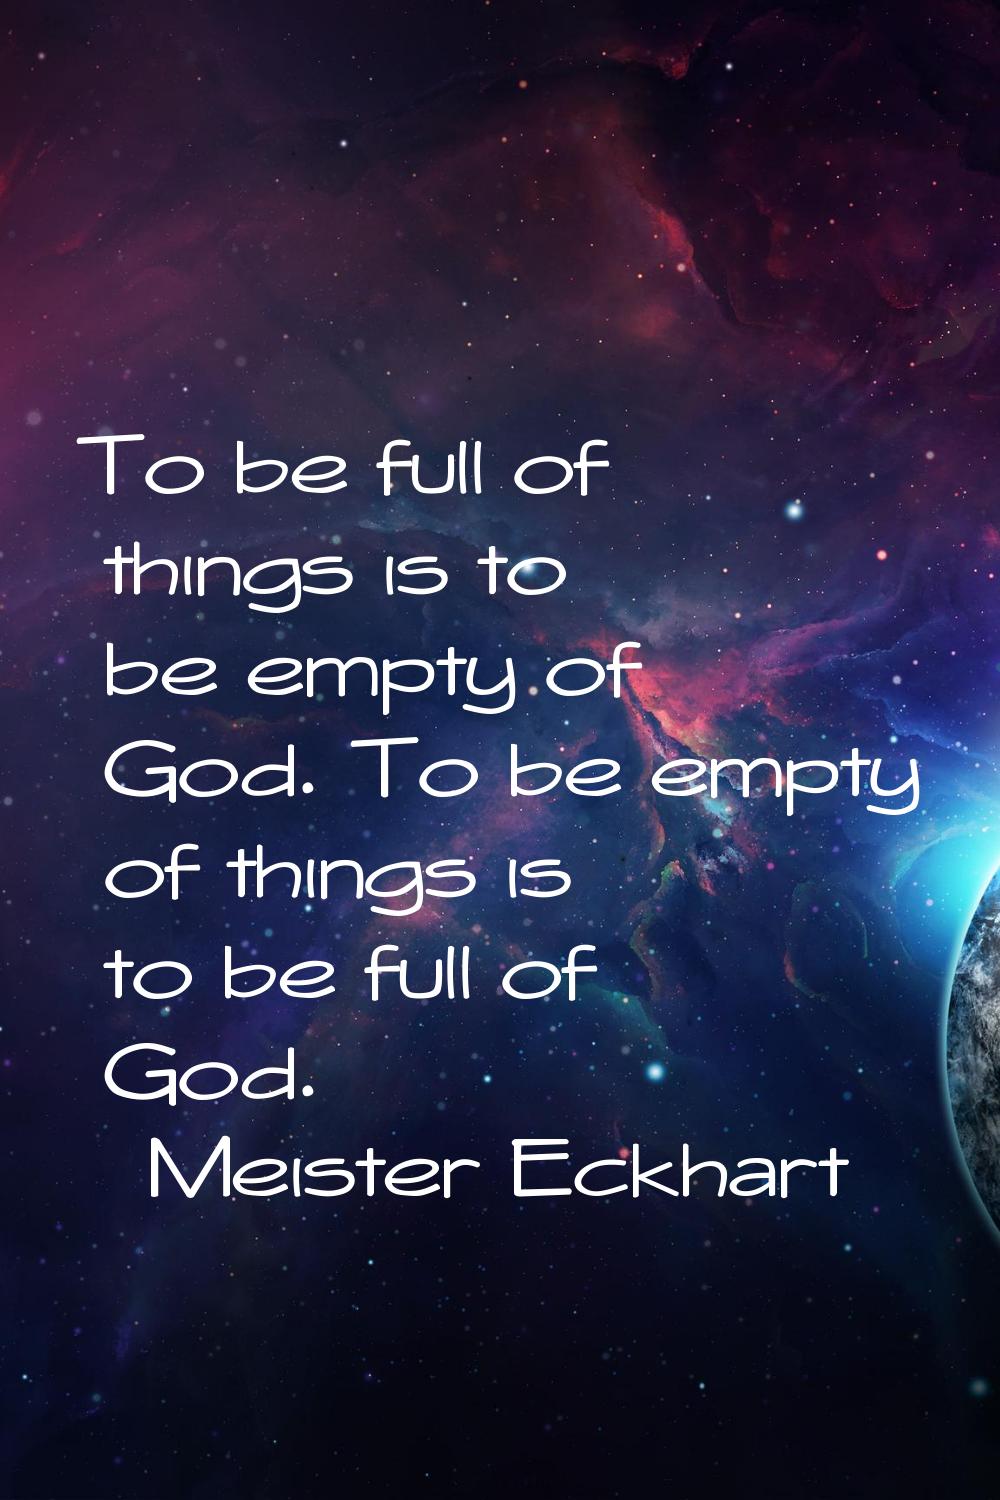 To be full of things is to be empty of God. To be empty of things is to be full of God.